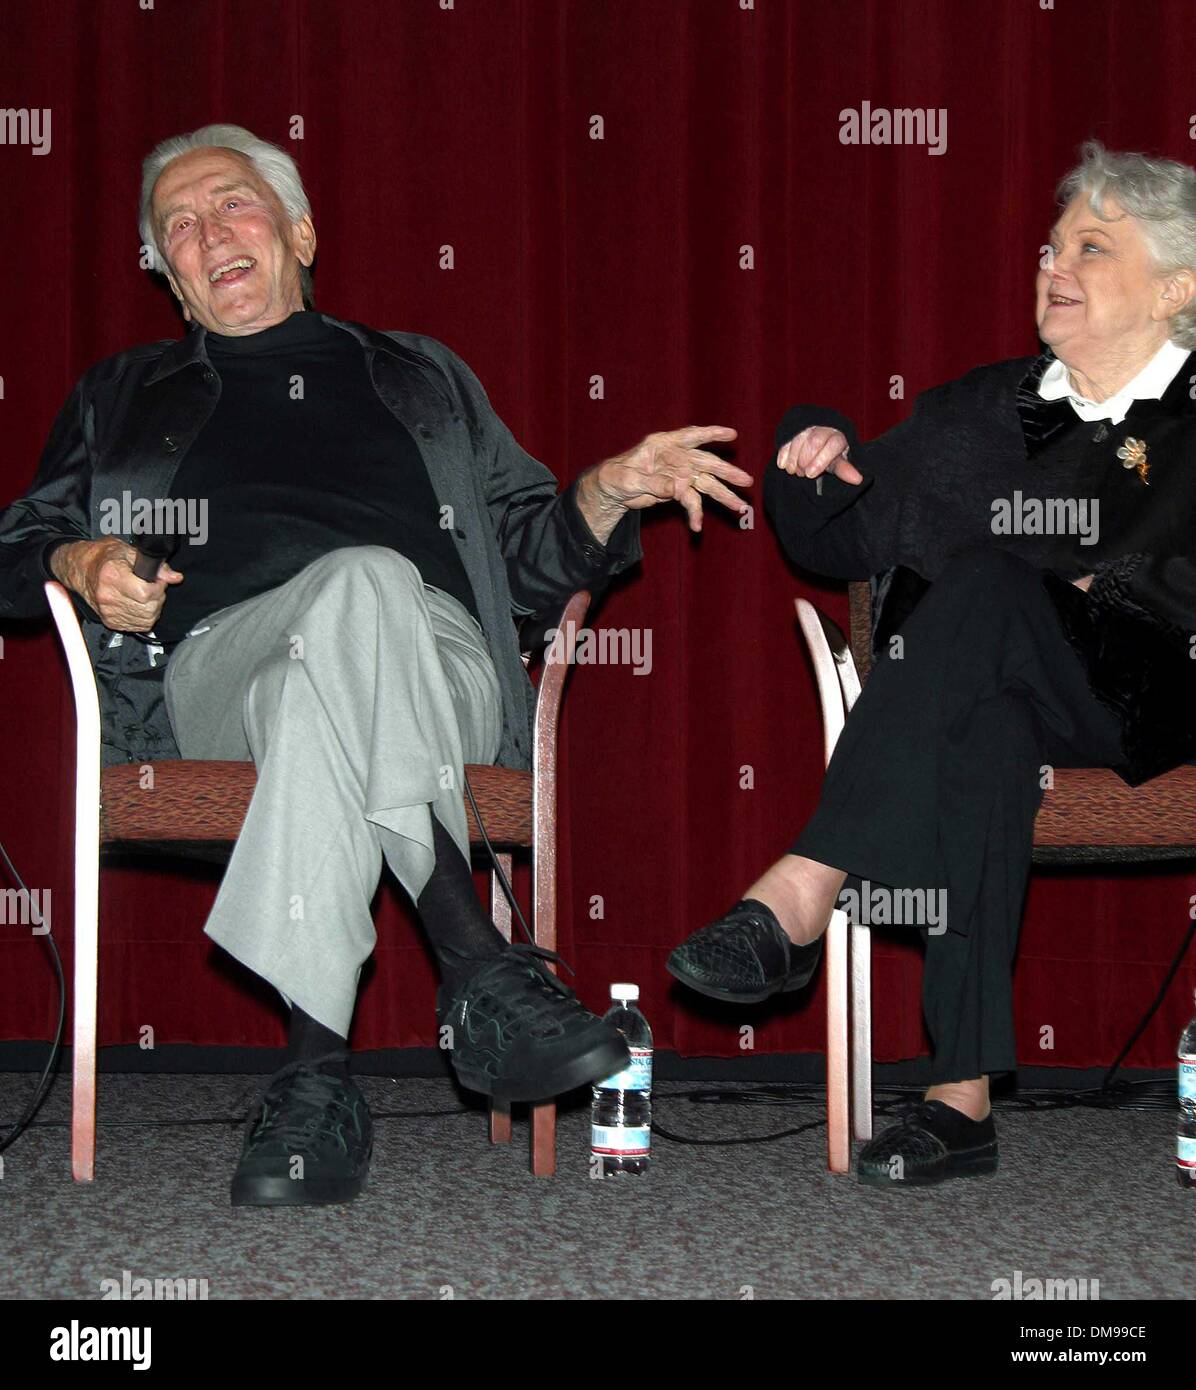 Oct. 22, 2002 - Los Angeles, CA, USA - K26849MR  SCREENING OF BILLY WILDER'S CLASSIC 1951 FILM ''THE BIG CARNIVAL,'' FOLLOWED BY A PANEL DISCUSSION ABOUT THE MAKING OF THE FILM WITH KIRK DOUGLAS AND JAN STERLING.DGA, LOS ANGELES, CA. .OCT 22, 2002. MILAN RYBA/   2002 .KIRK DOUGLAS AND JAN STERLING(Credit Image: © Globe Photos/ZUMAPRESS.com) Stock Photo